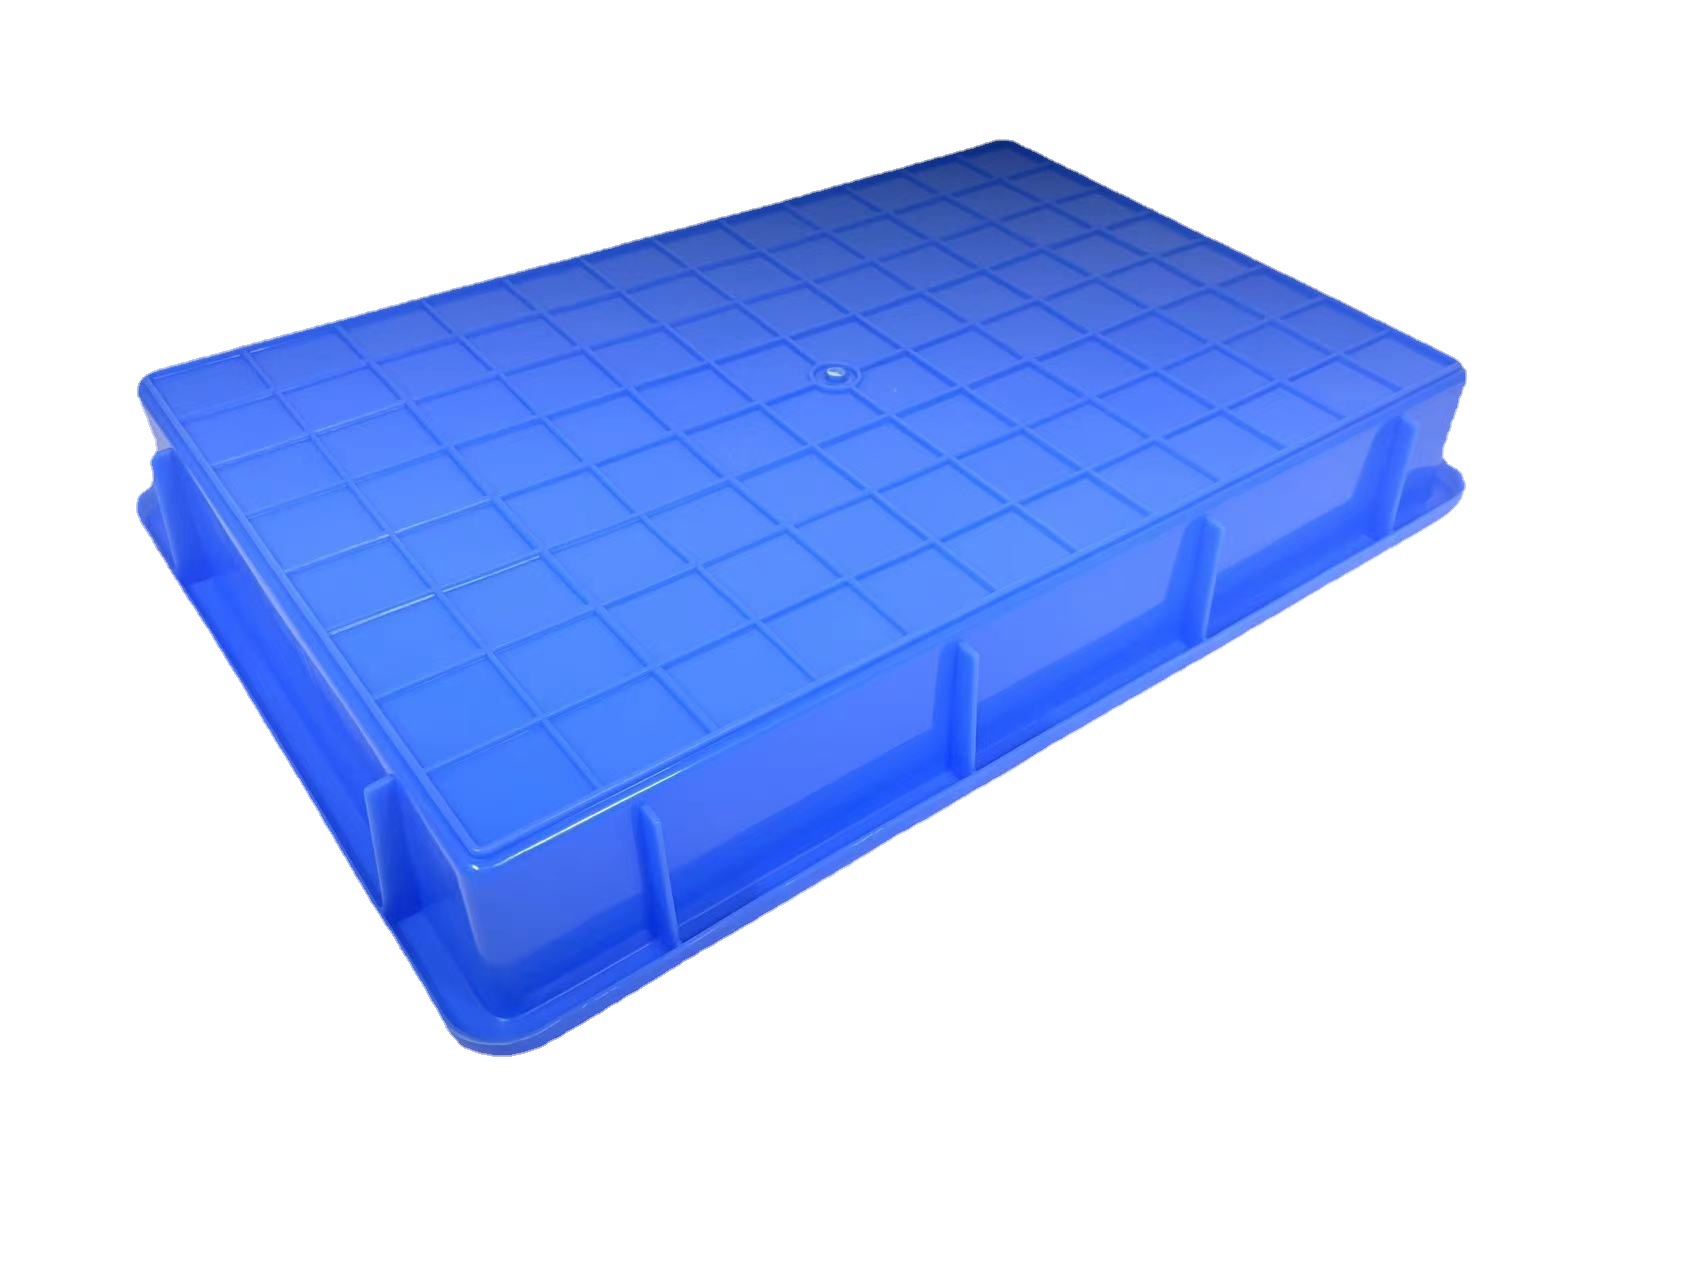 Plastic Rectangular Square Plate Thickened Shallow Mouth Storage Shelf Material Box Plastic Plate Hardware Tools Non-Airtight Crate